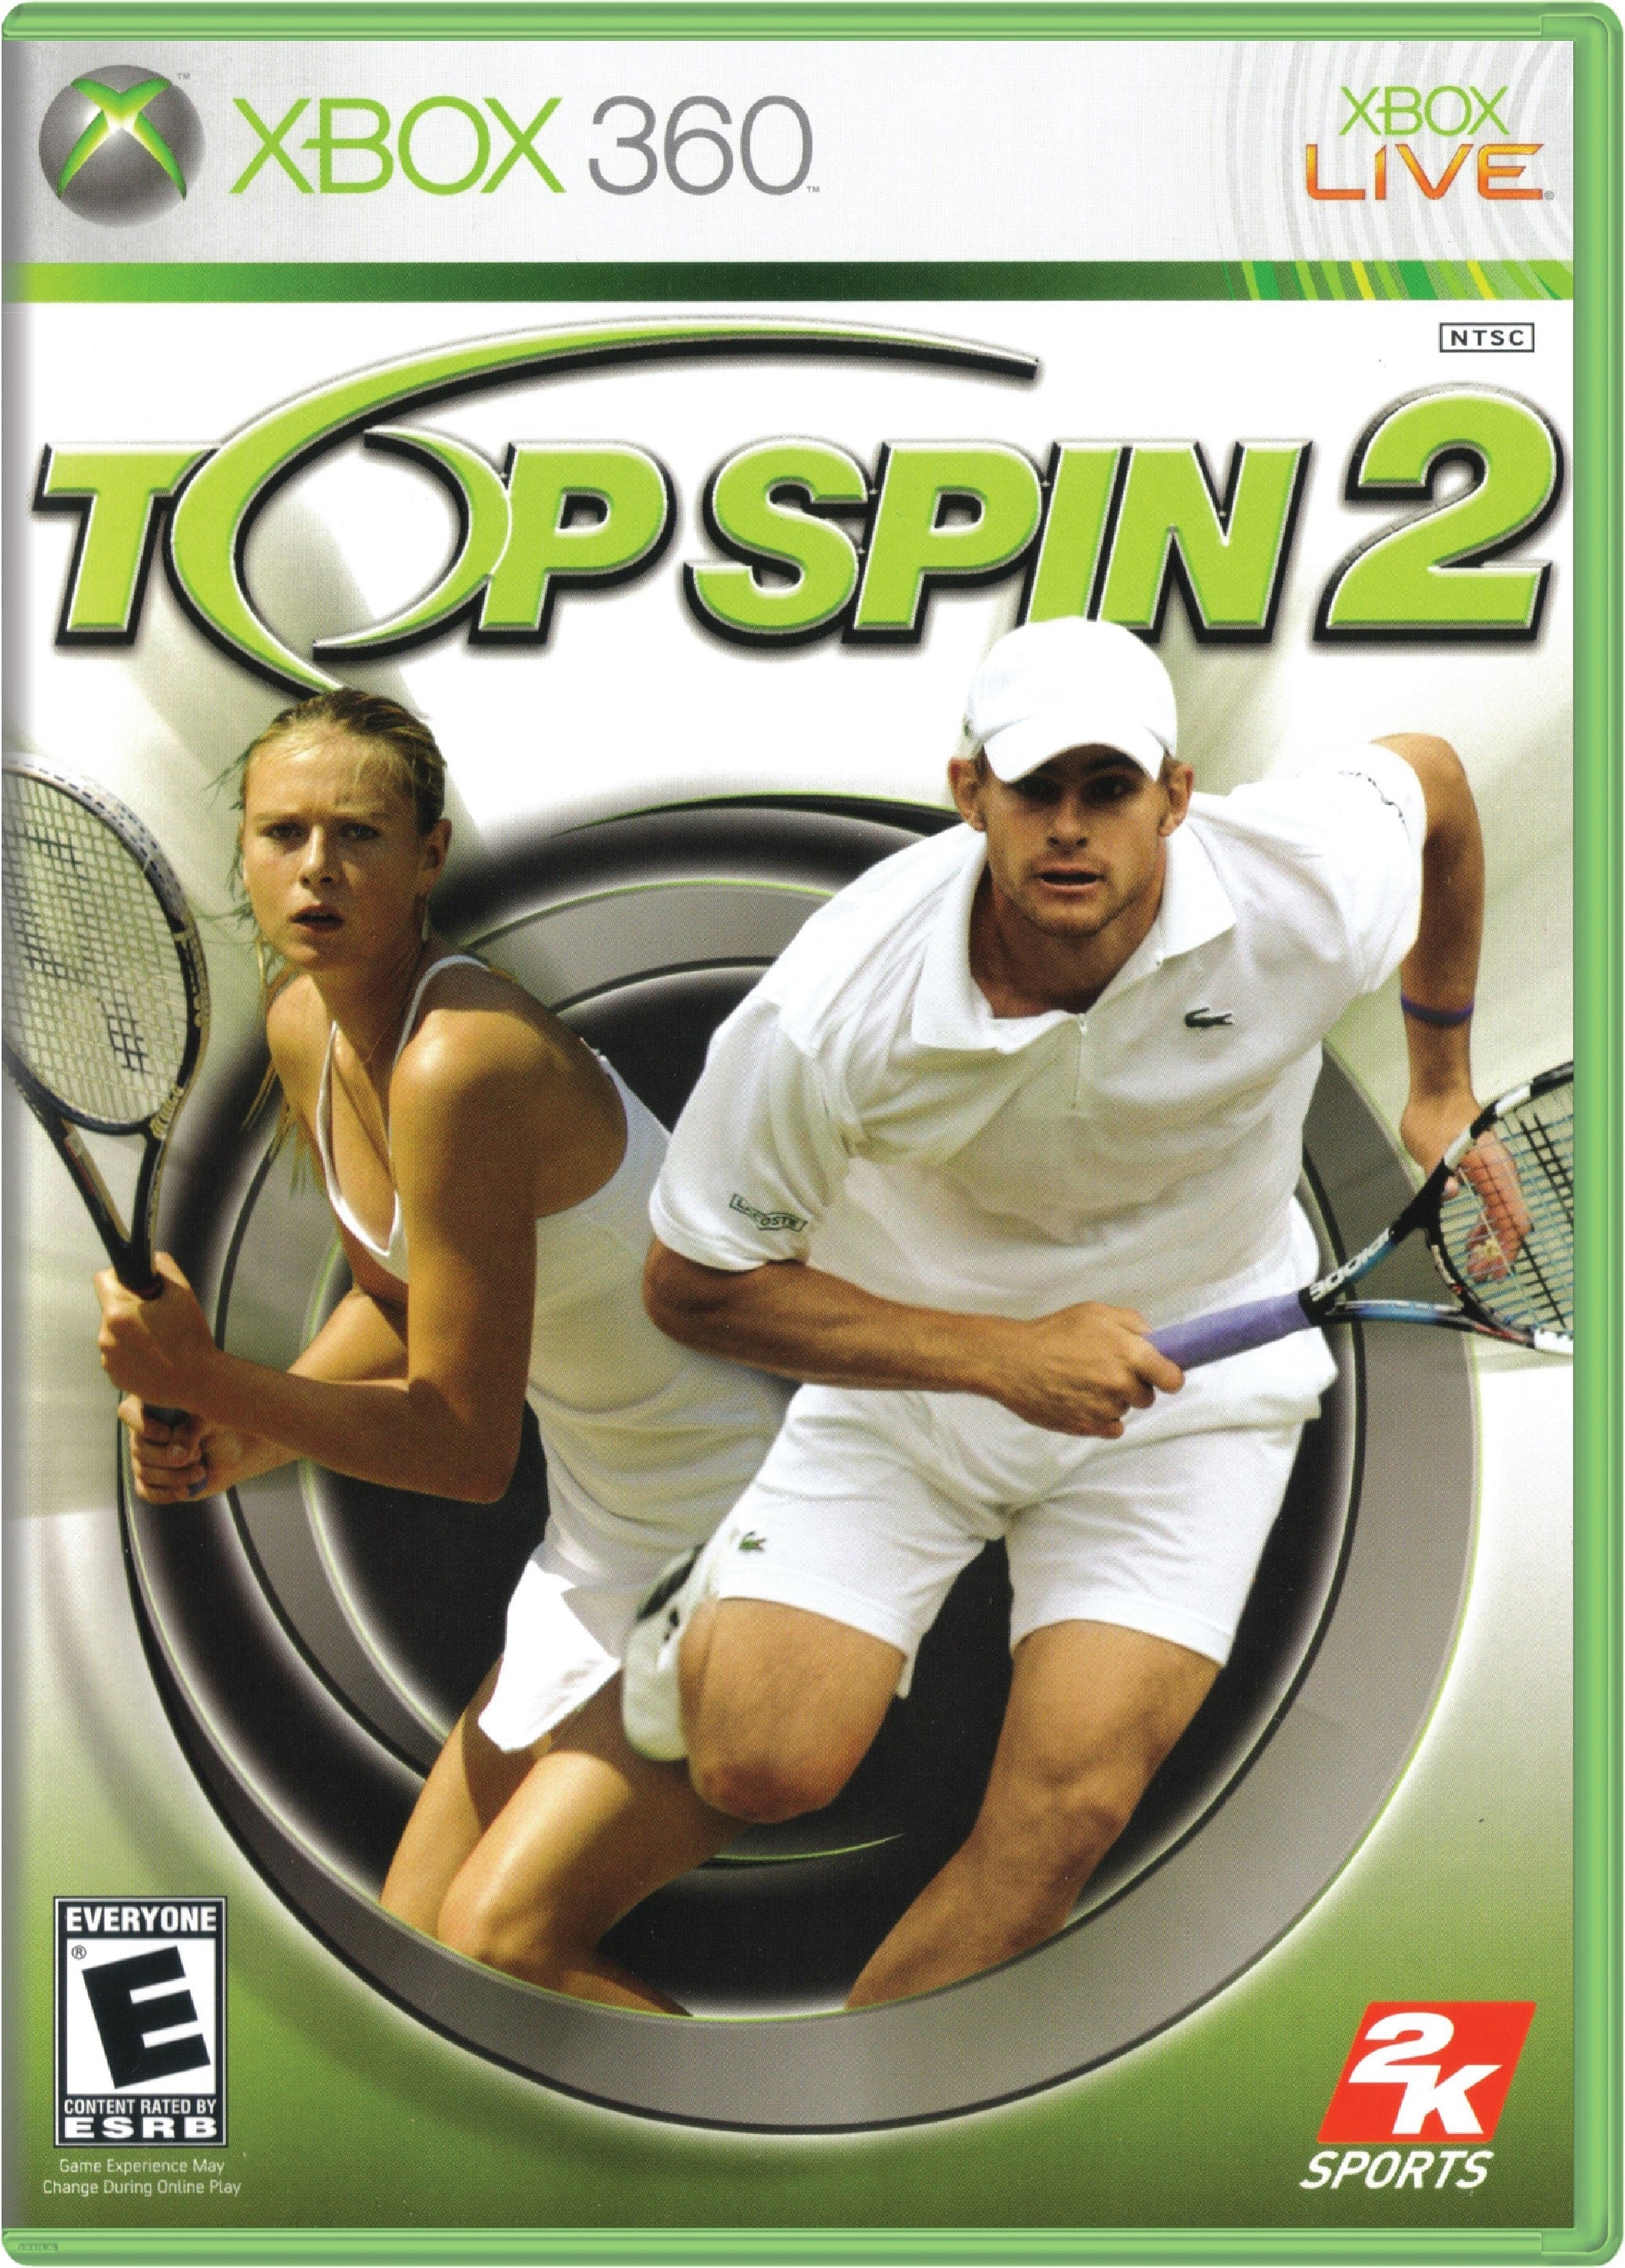 Top Spin 2 Cover Art